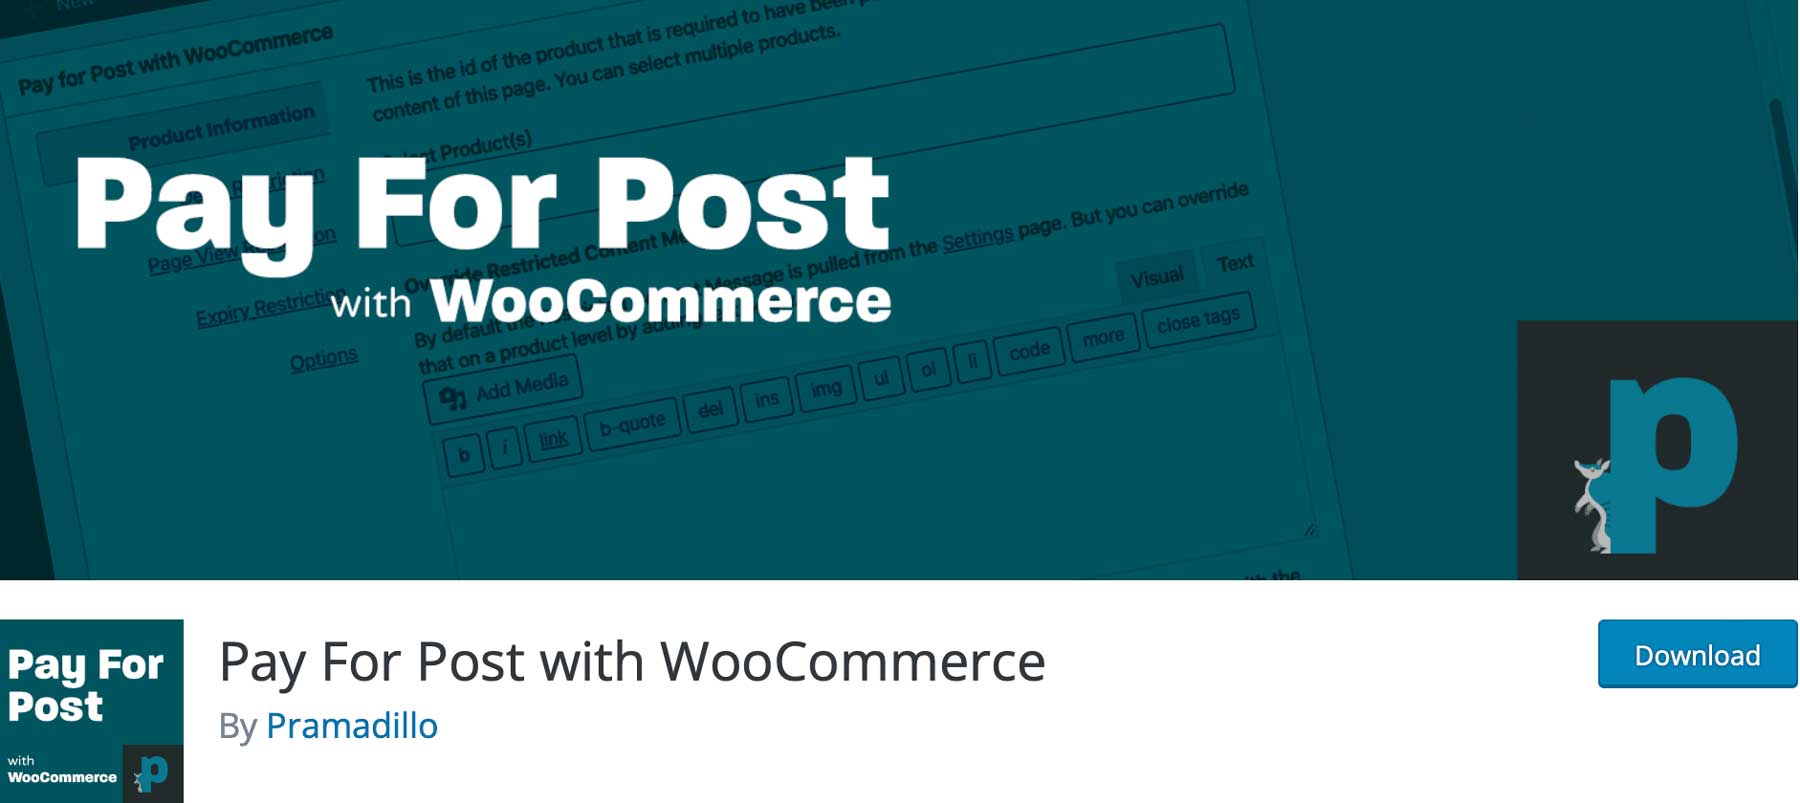 Pay for Post with WooCommerce is one of the best WordPress paywall plugins